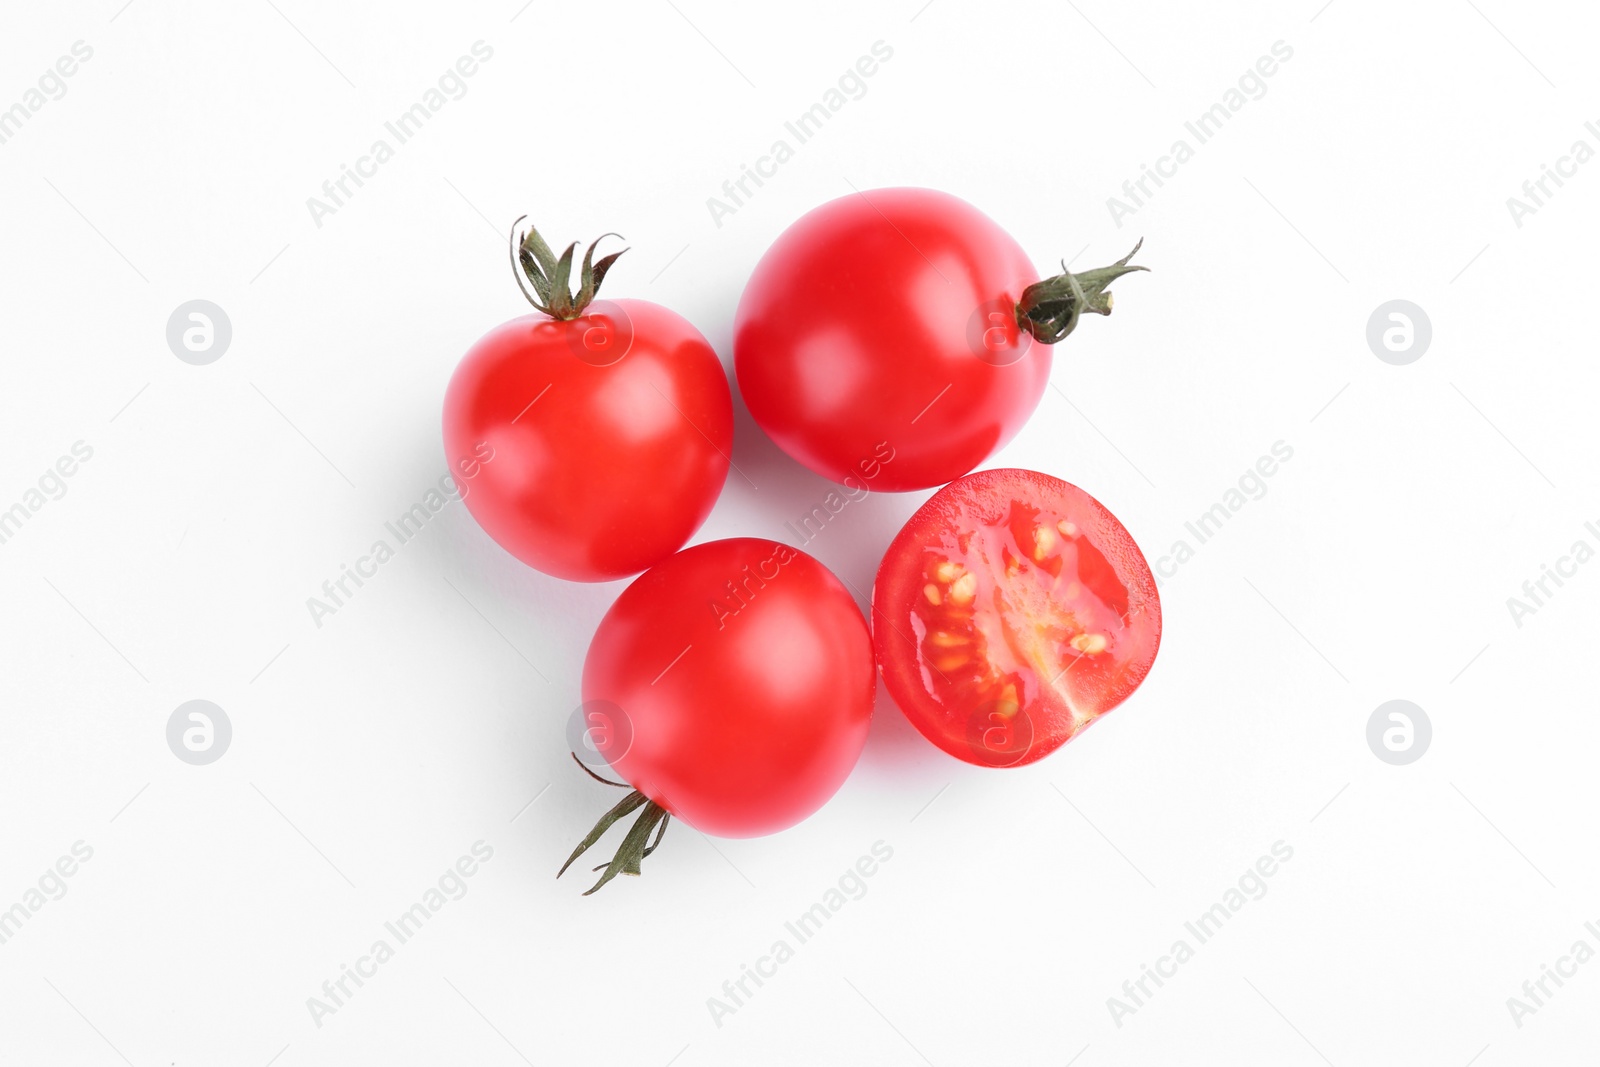 Photo of Whole and cut ripe tomatoes on white background, top view